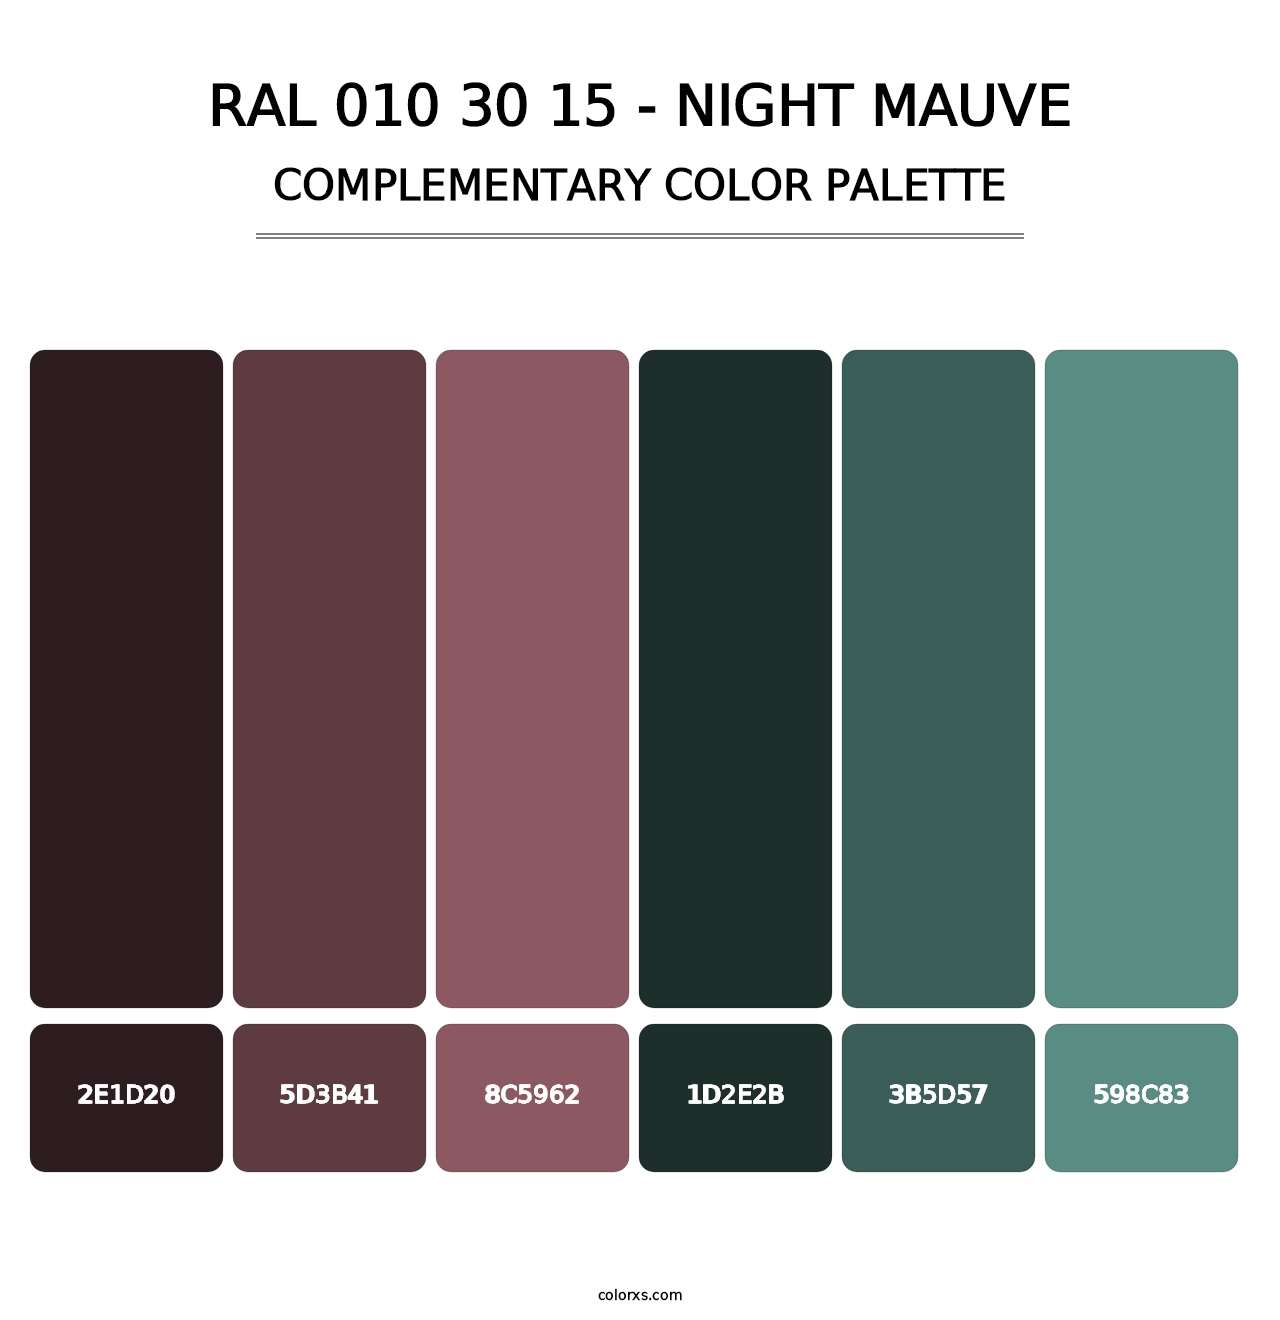 RAL 010 30 15 - Night Mauve - Complementary Color Palette